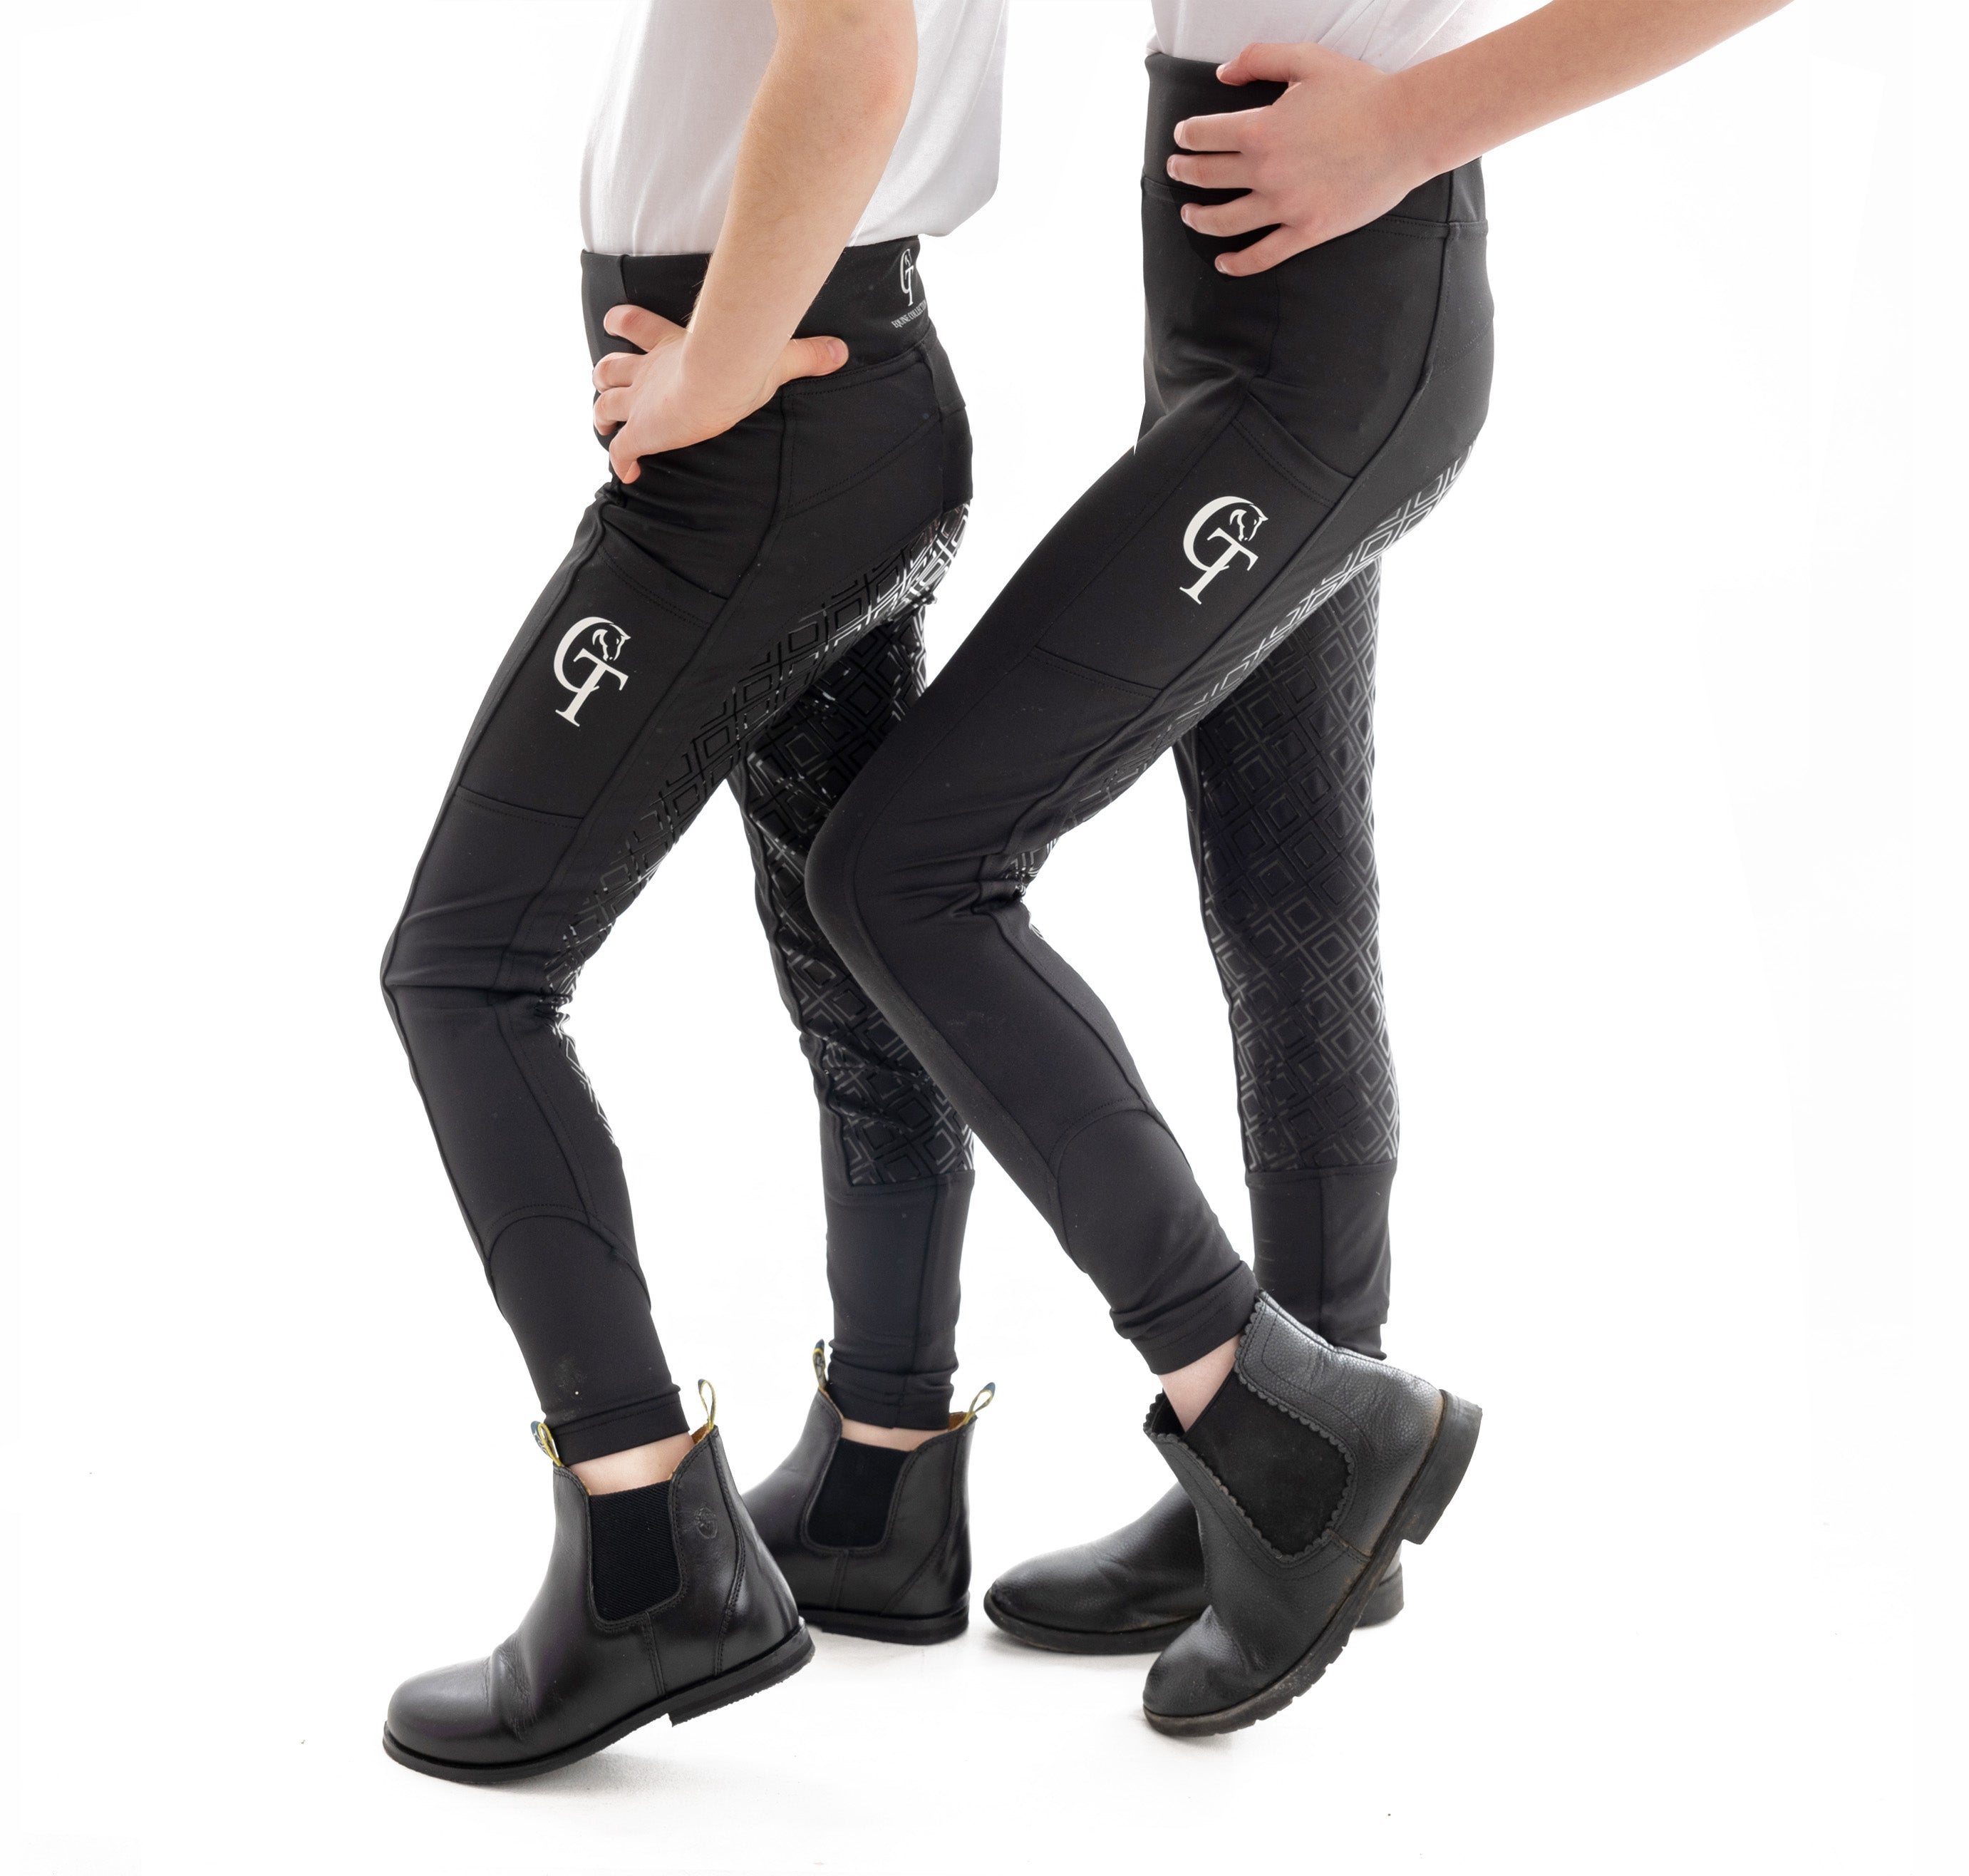 Young Rider - Winter Thermal Riding Leggings - Black